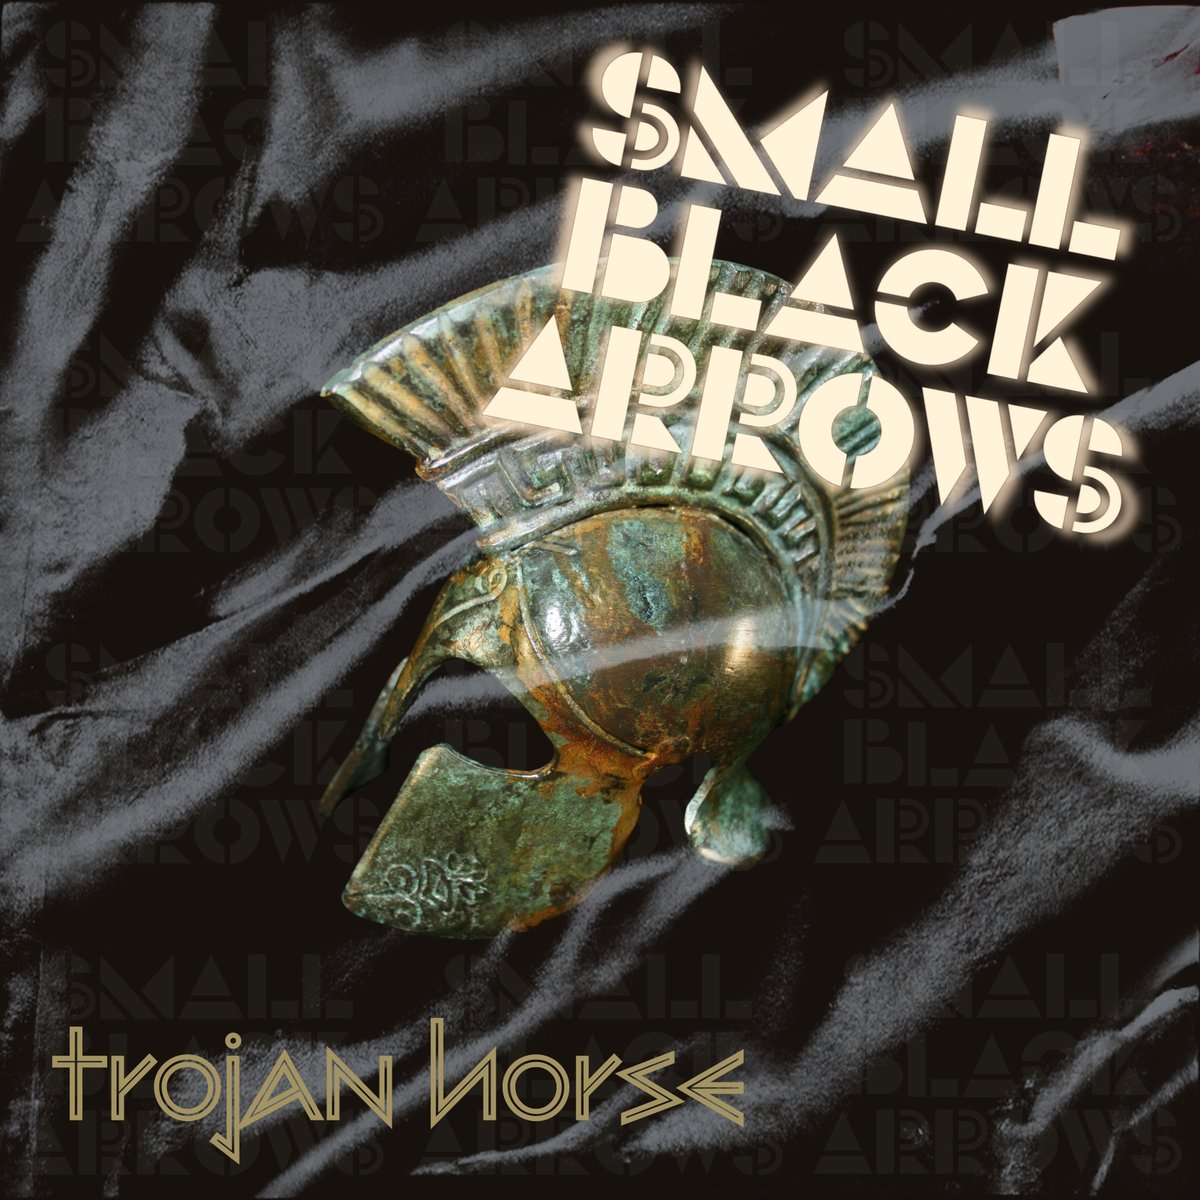 Ask us about @SmallBLKArrows new single ‘TROJAN HORSE’ released on Friday 10th May on @42_records Records Apple Music link: itunes.apple.com/album/id/17427… Spotify URI - spotify:album:3NXtyjzbvYXWlbVDah7GW3